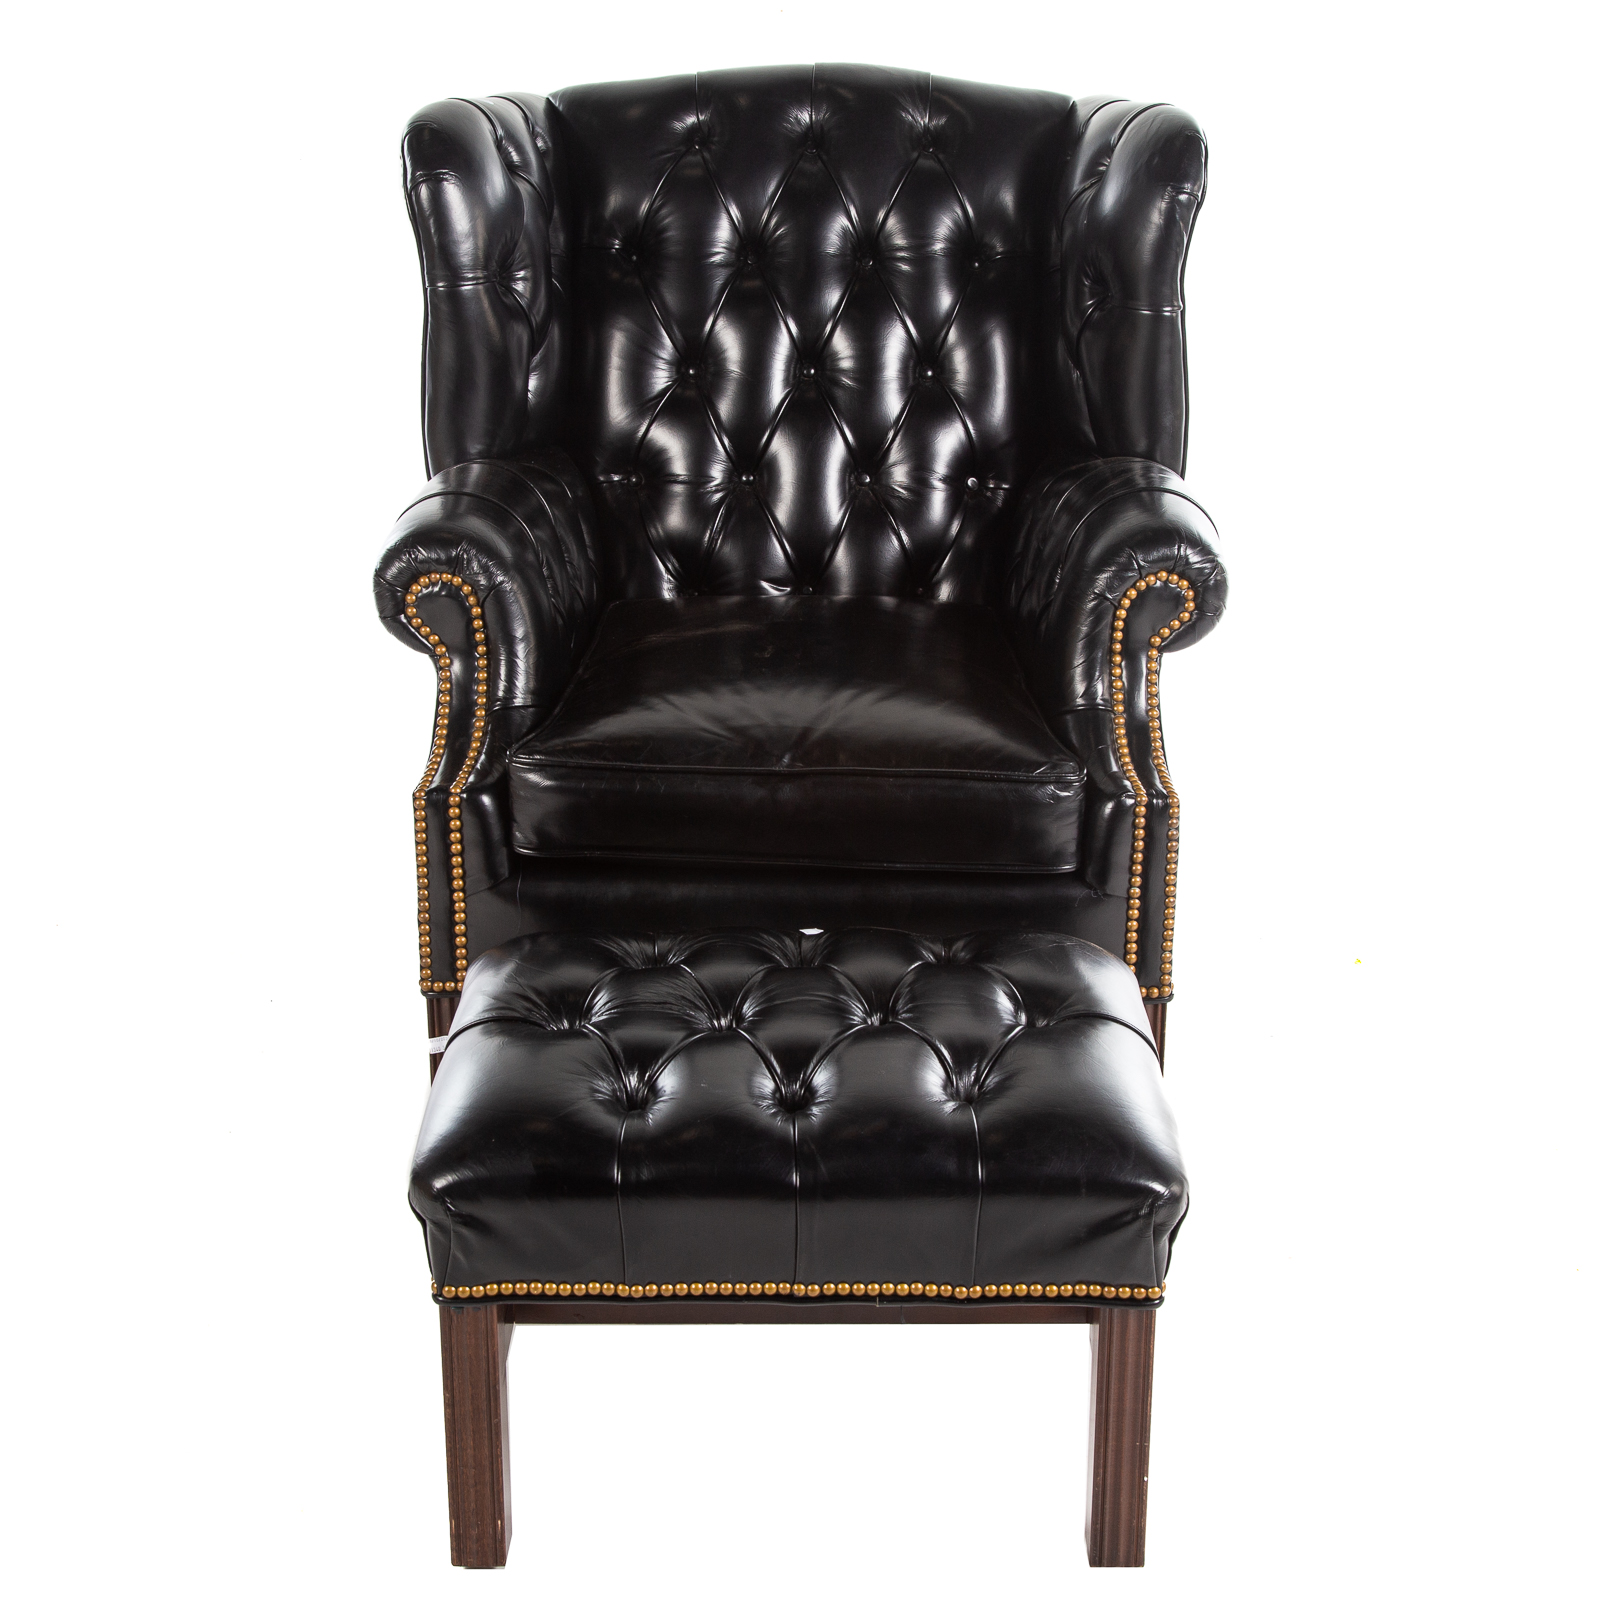 MCKINLEY LEATHER TUFTED WING CHAIR 36a4f1